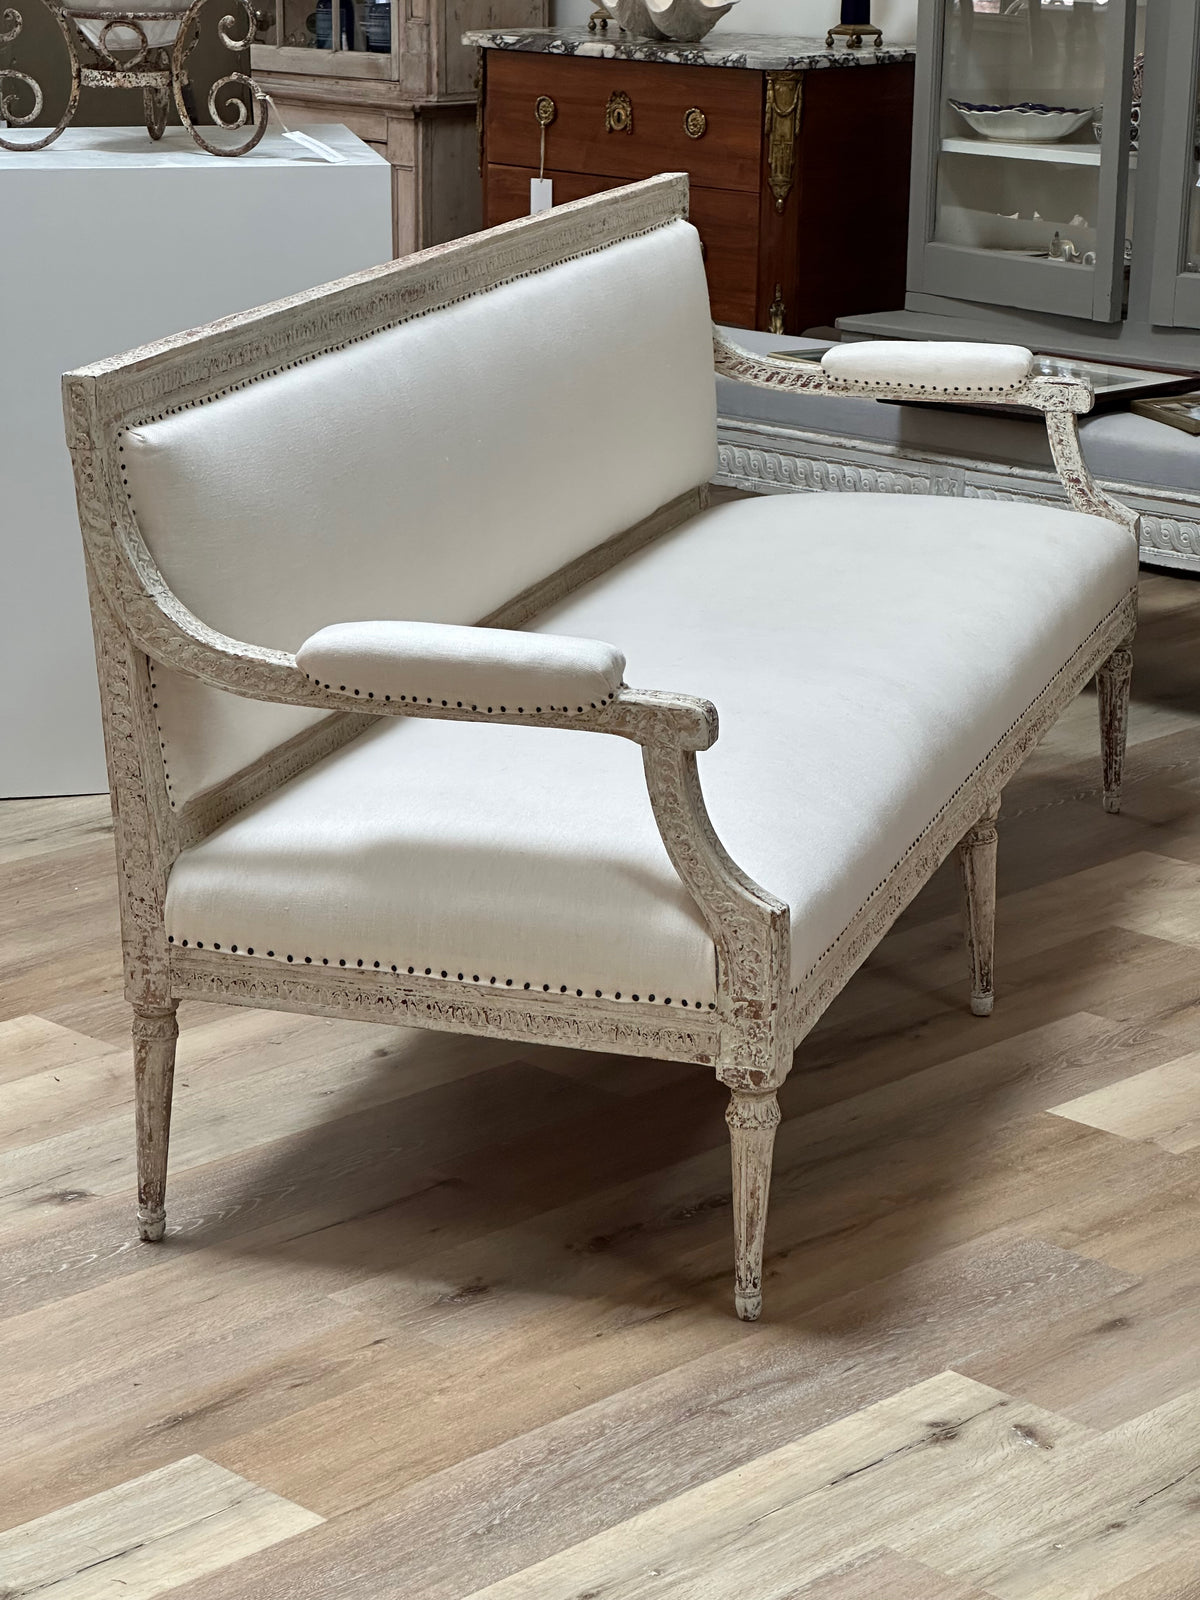 A Swedish Neoclassical Bench / Settee   Late 18th- 19th century